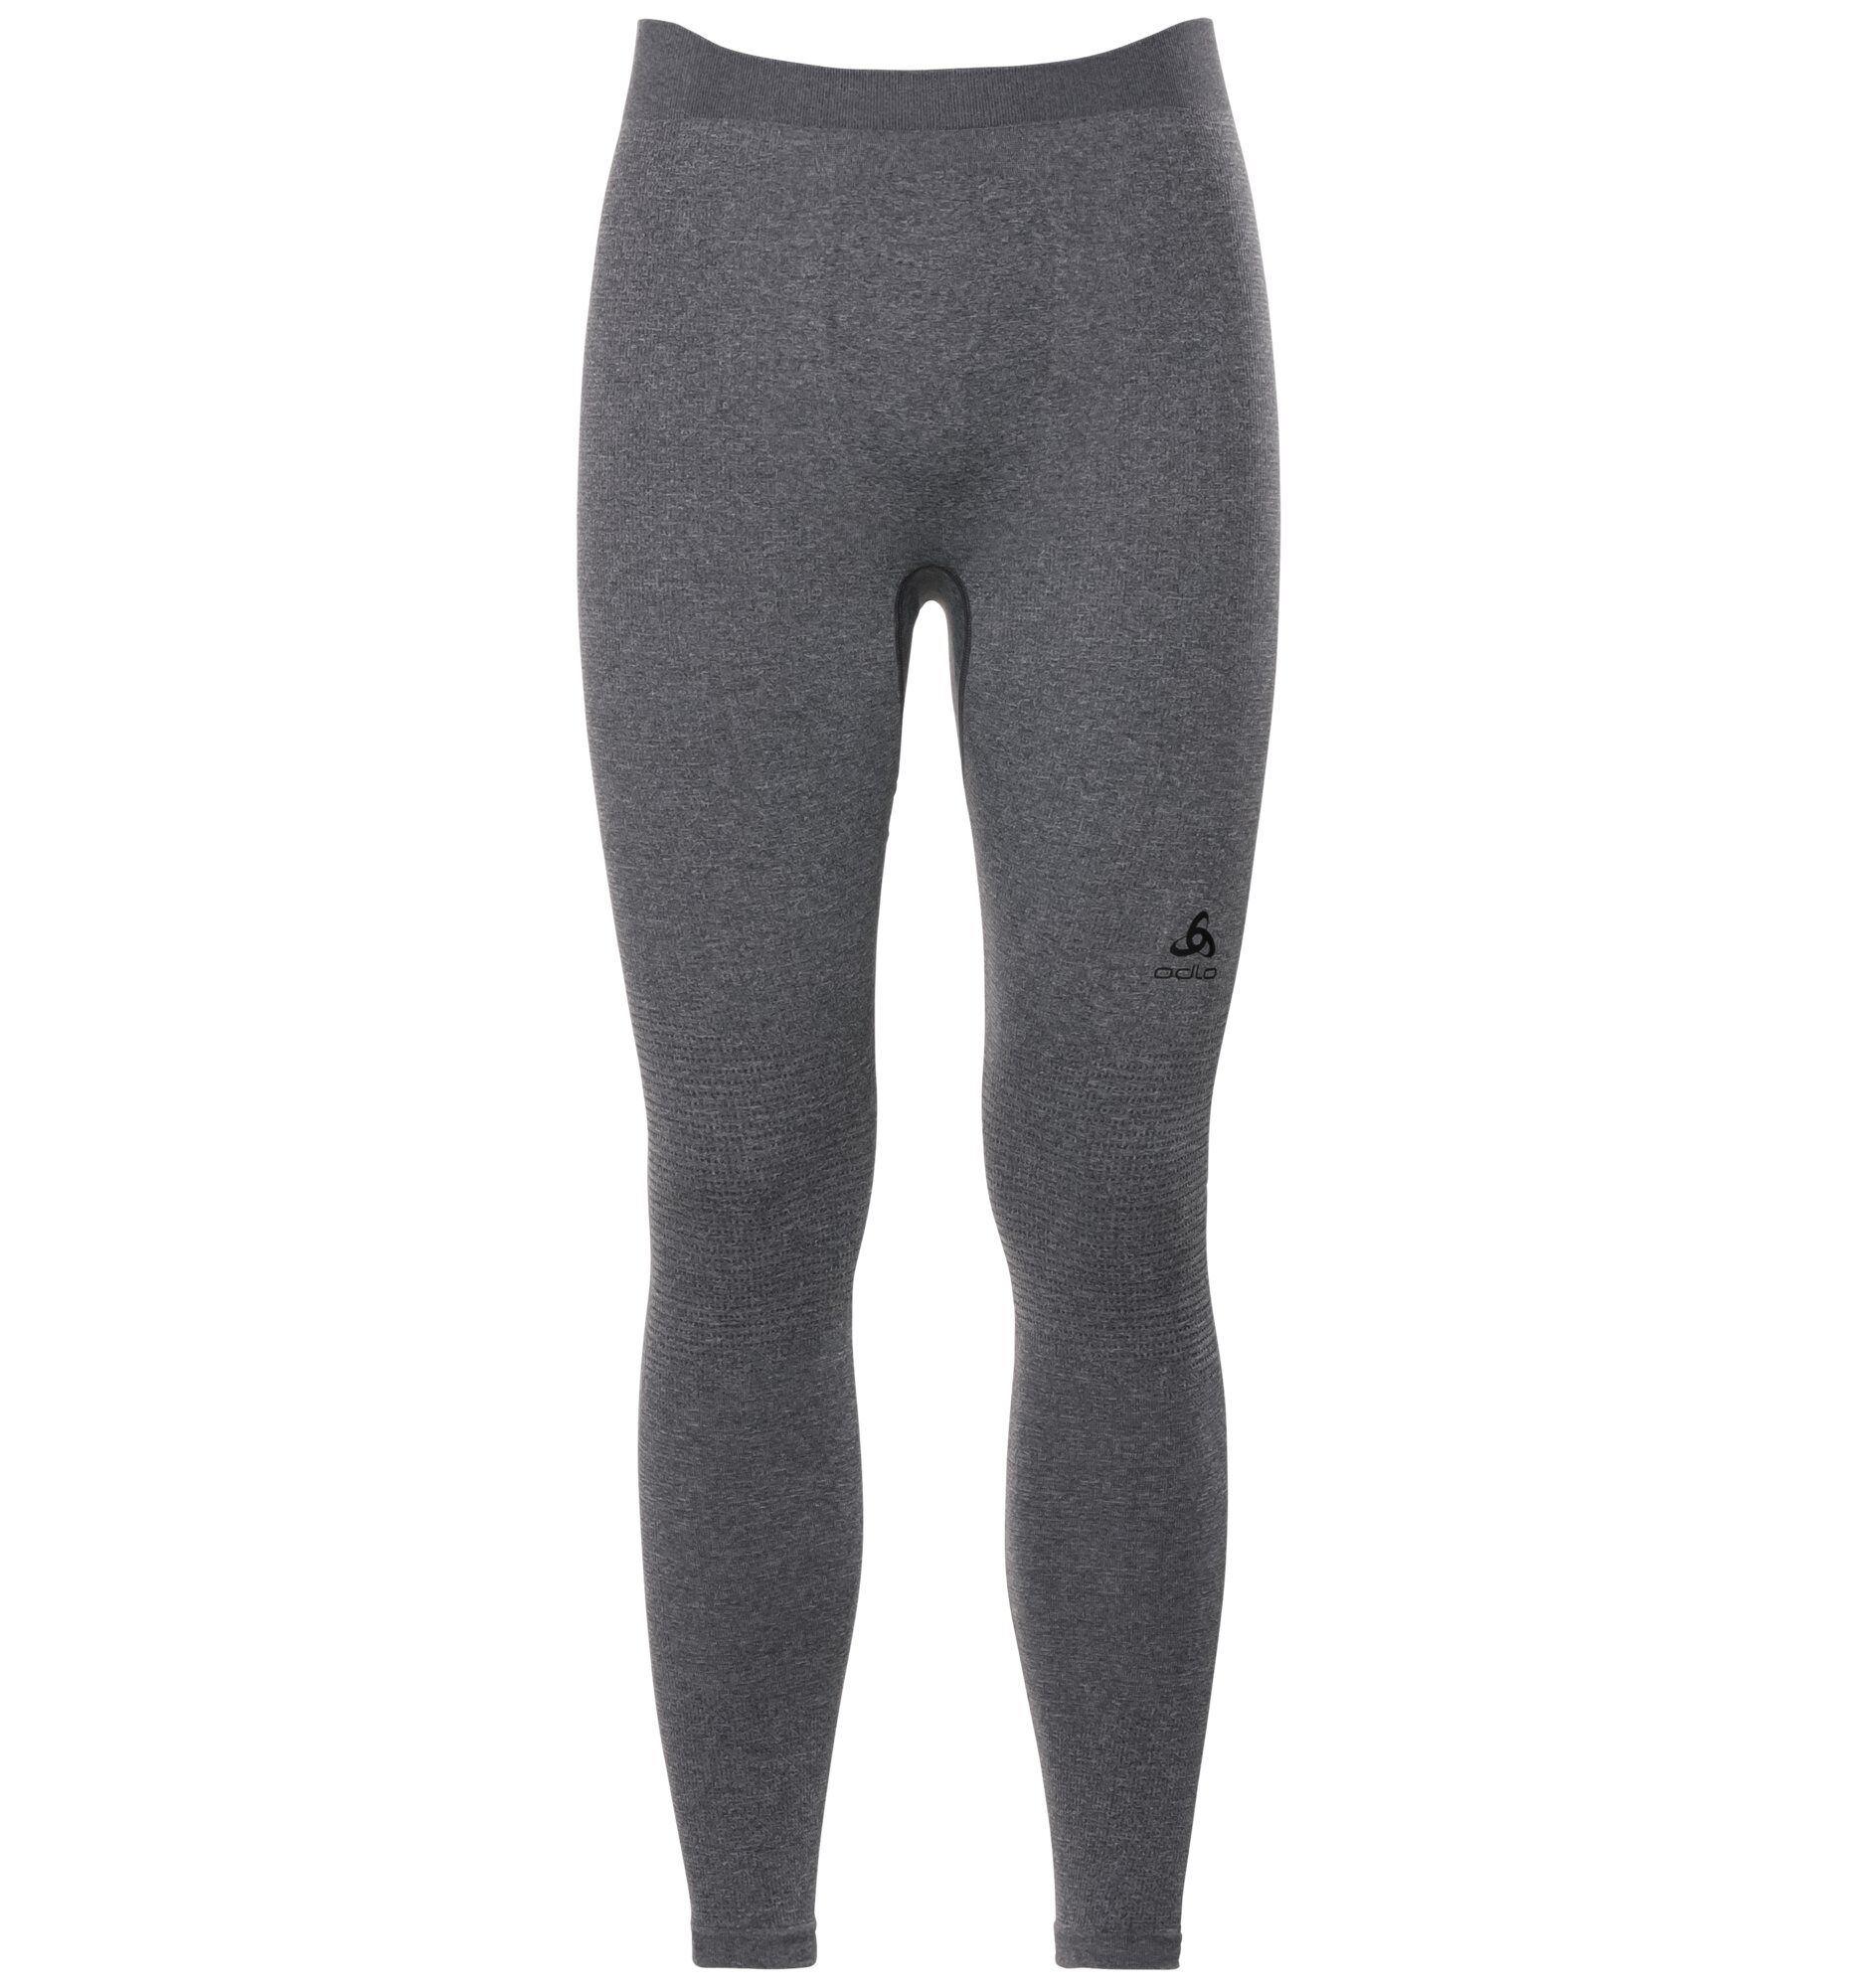 Odlo Performance Warm - Collant thermique homme | Hardloop